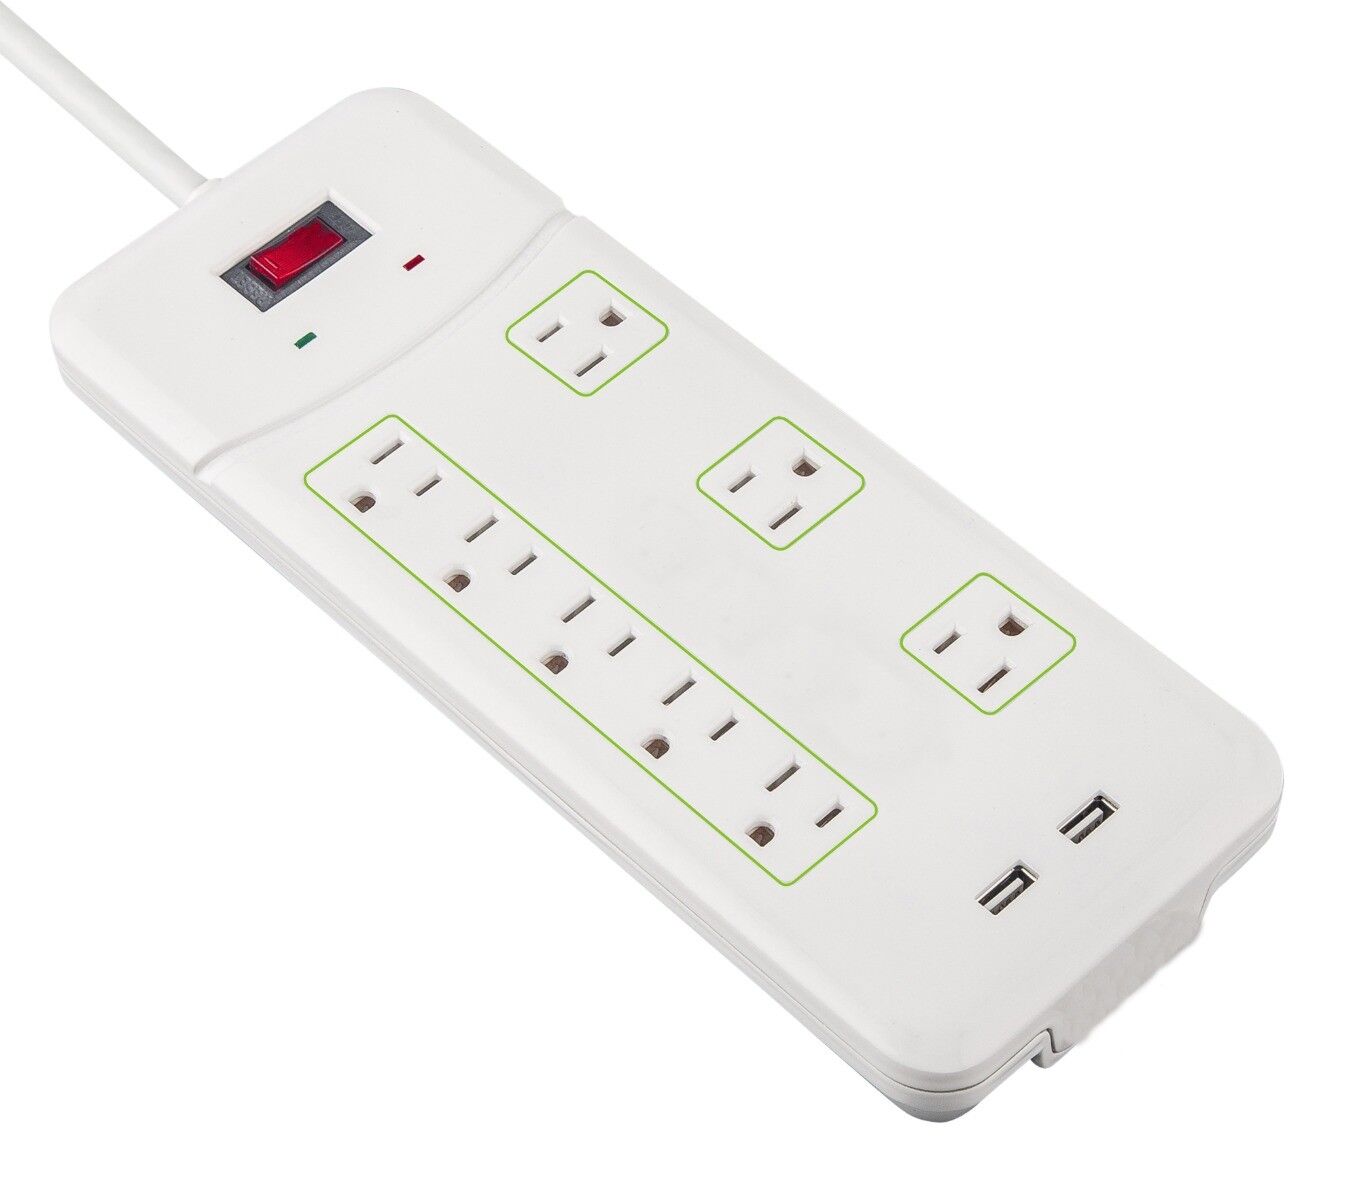 8 Outlet Sale SALE% OFF Power Strip Surge Protector with 900 USB Seattle Mall 15A 2 125V 3ft